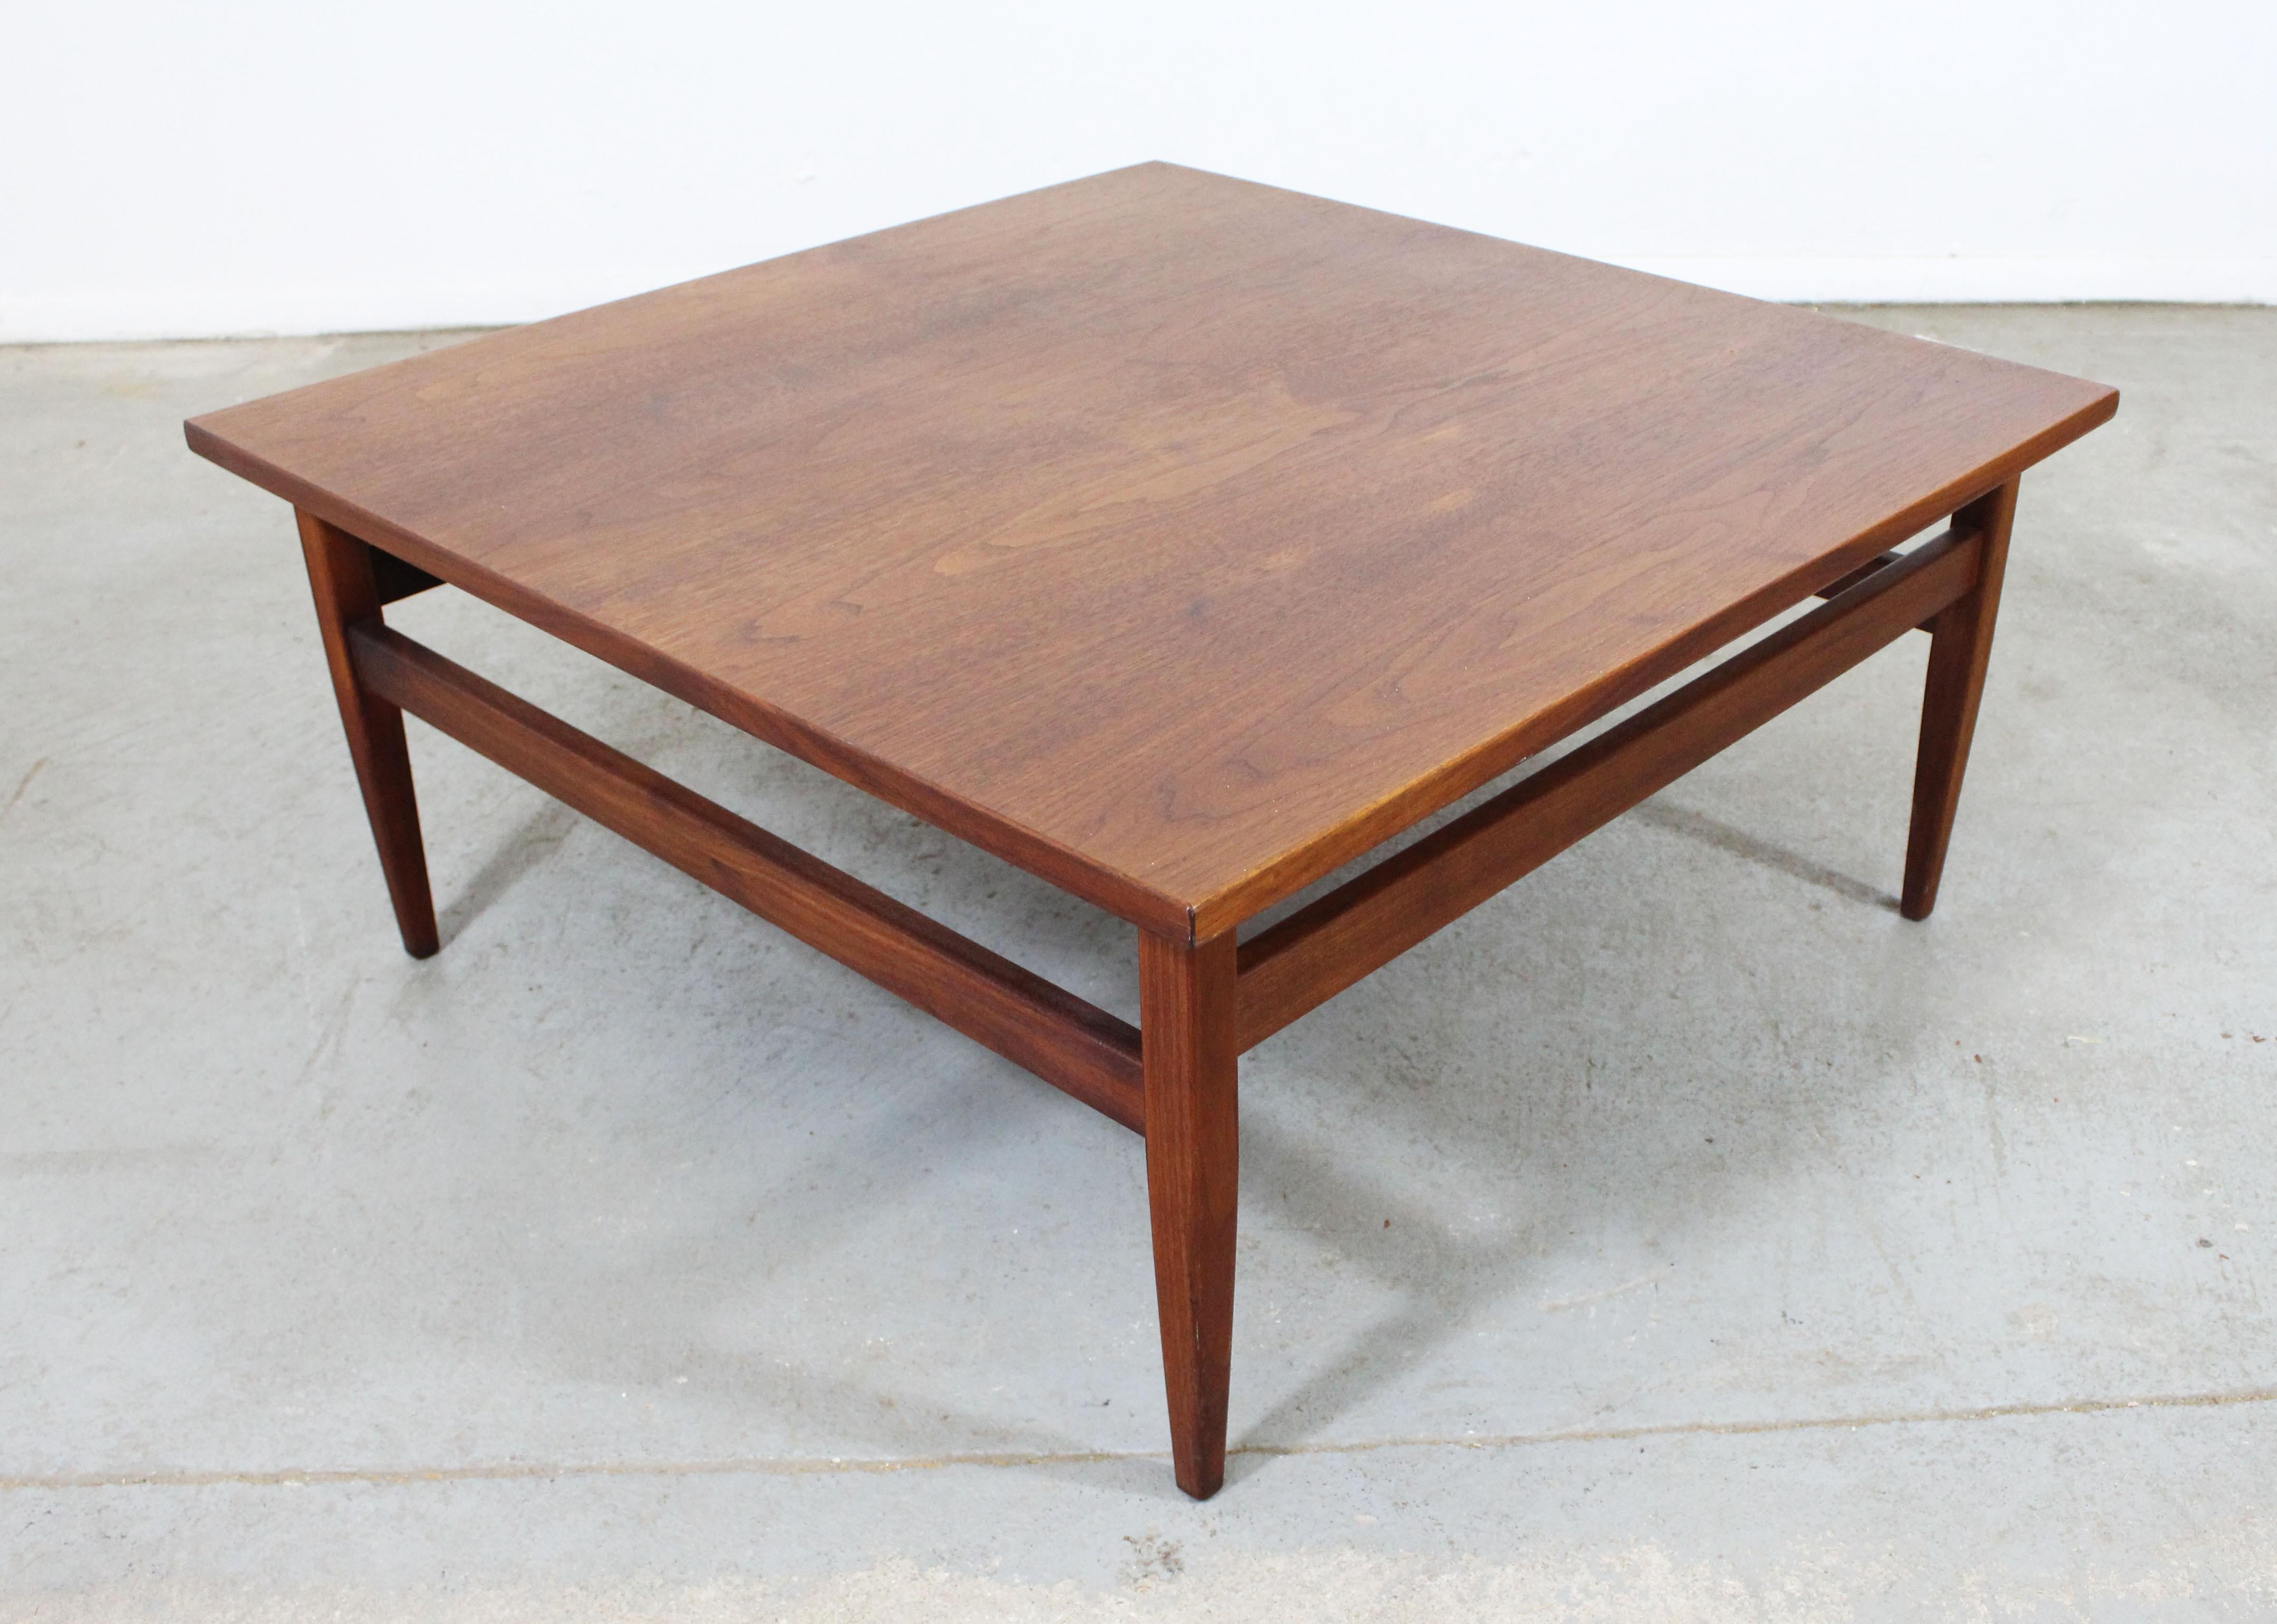 Offered is a midcentury square teak coffee table. It is in excellent condition for its age, showing minor wear (small nick on top, age wear-see pictures). It is not signed. 

Dimensions: 
32